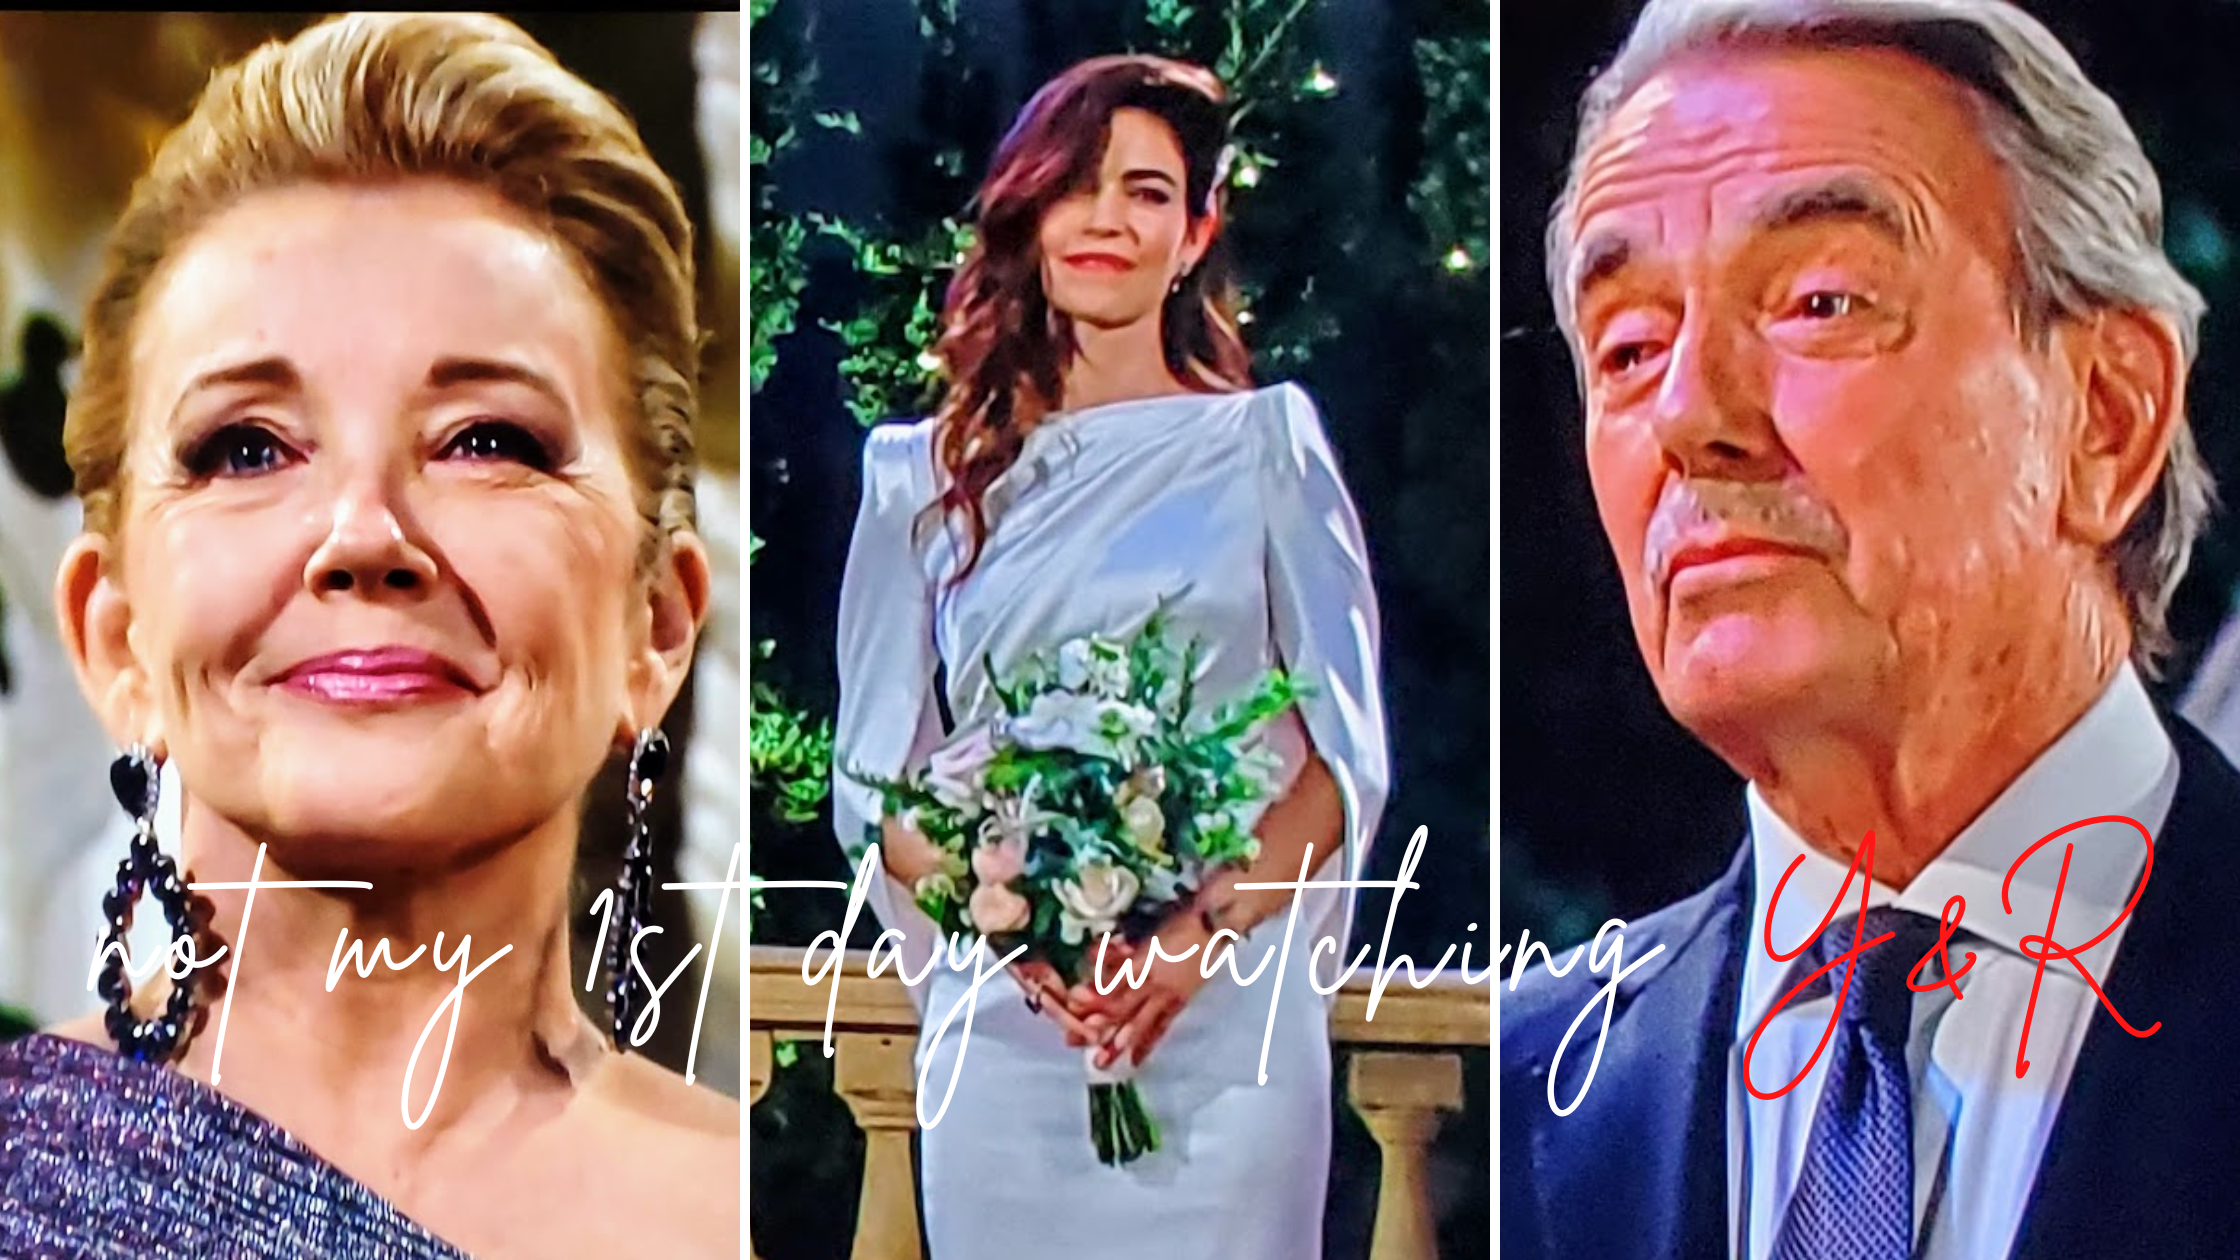 The Newman Palazzo & The Wedding of the Century on The Young & the Restless